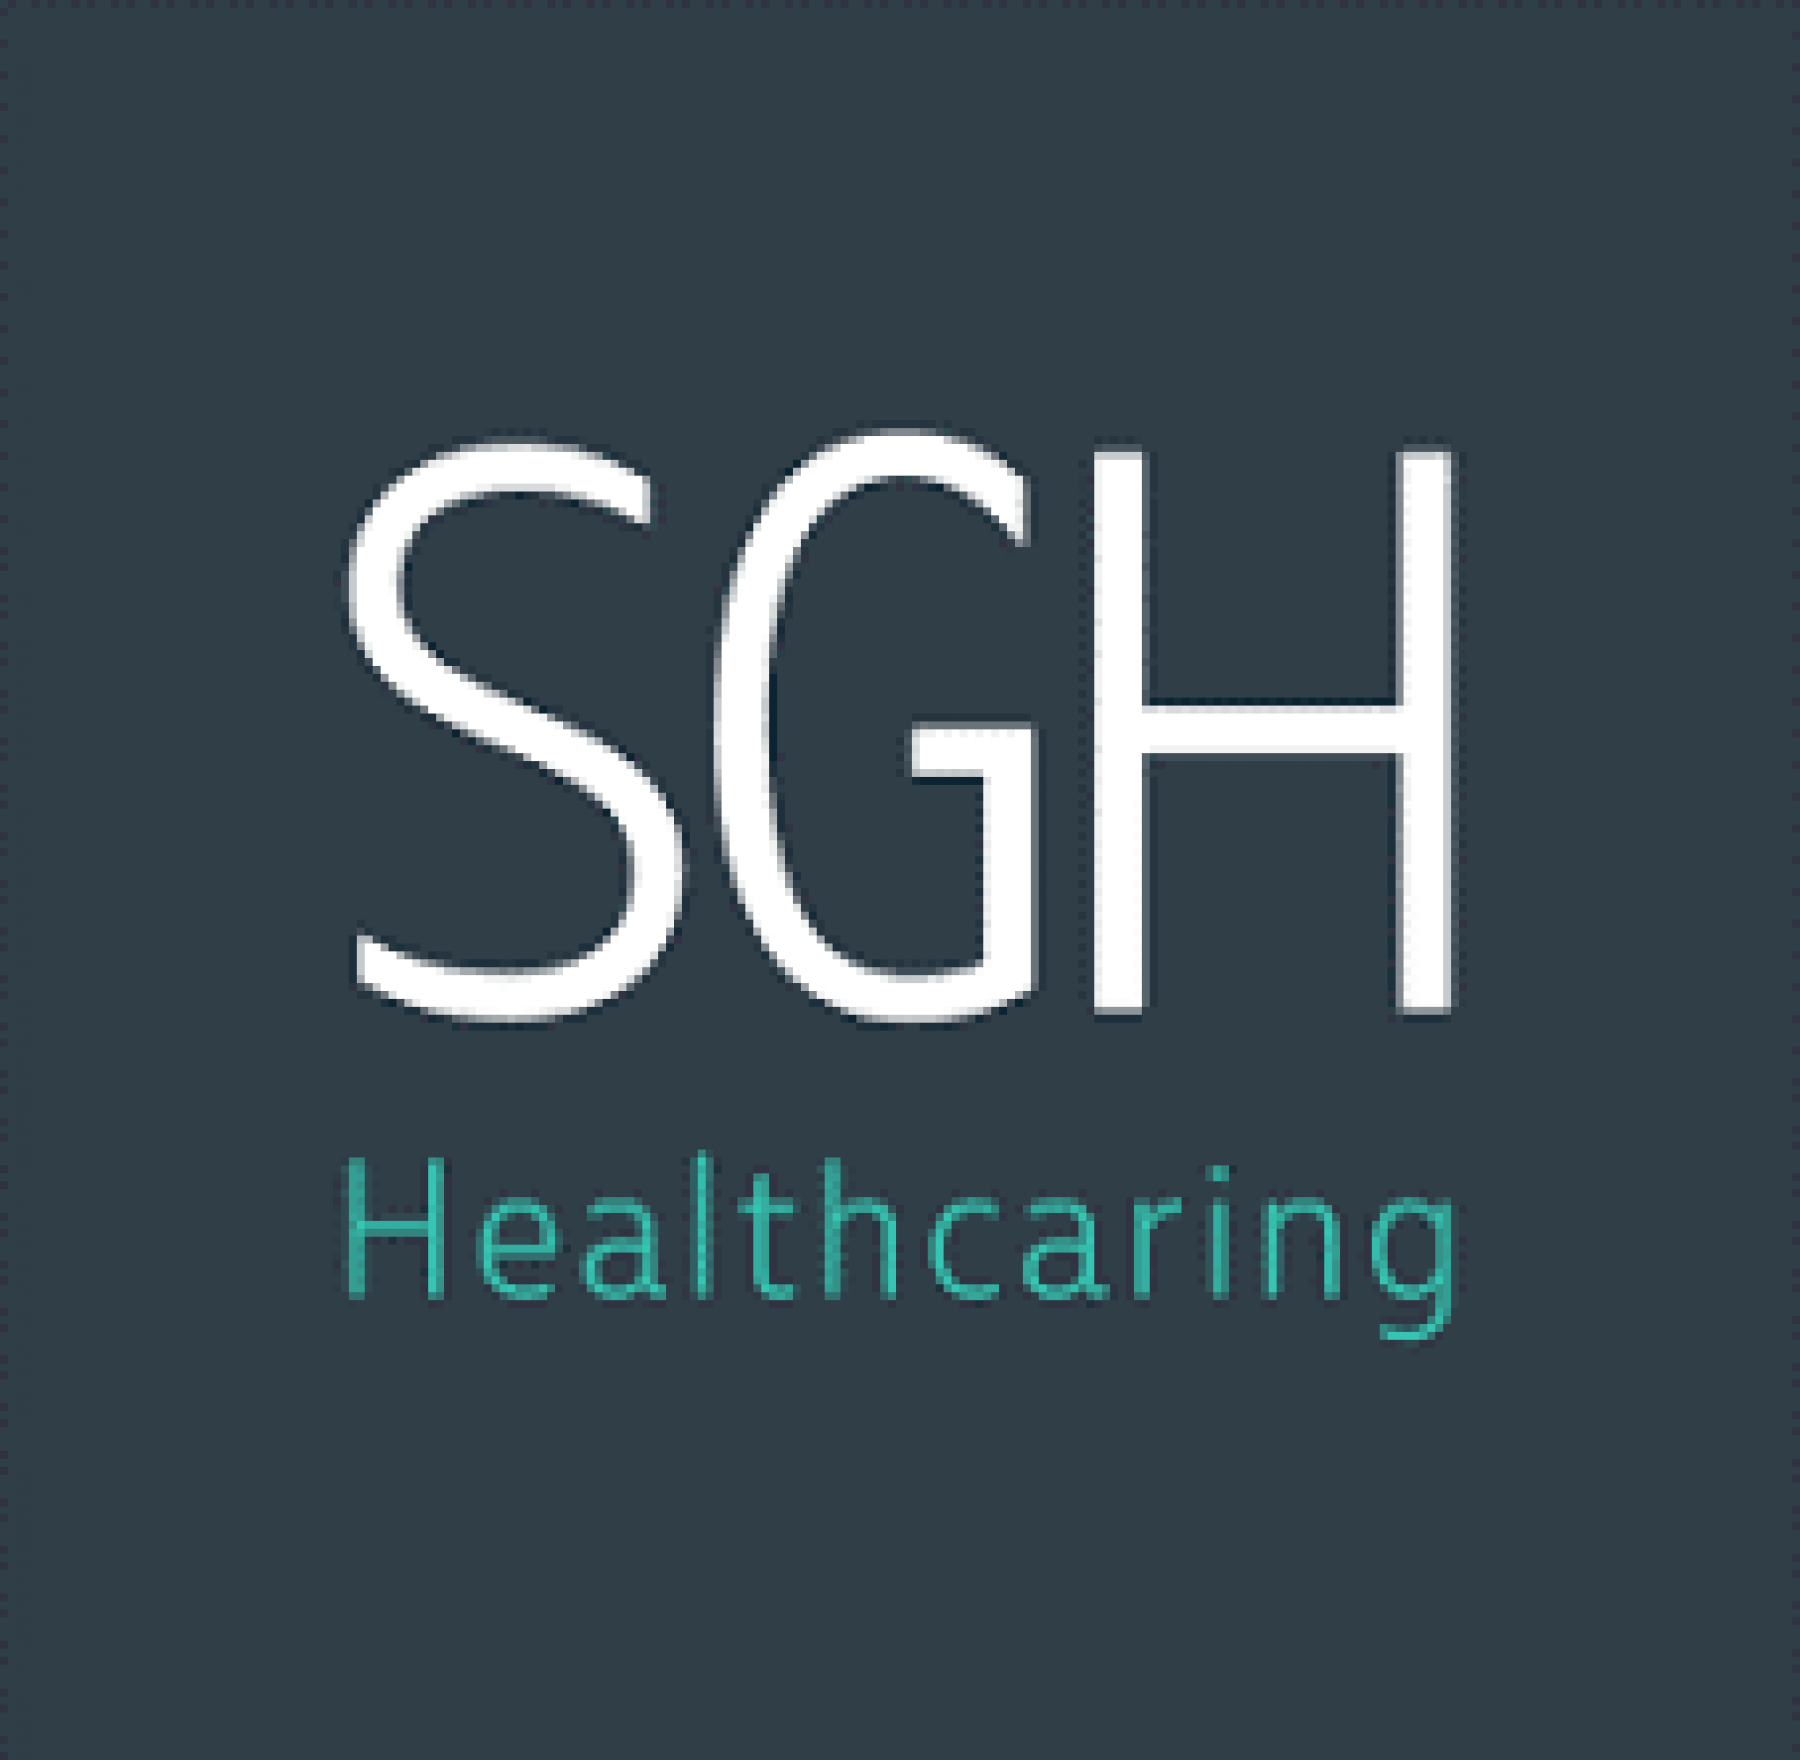 Levine Keszler advises <b>SGH healthcaring</b> in connection with the acquisitions of eskiss packaging and Laboratorie Dosapharm